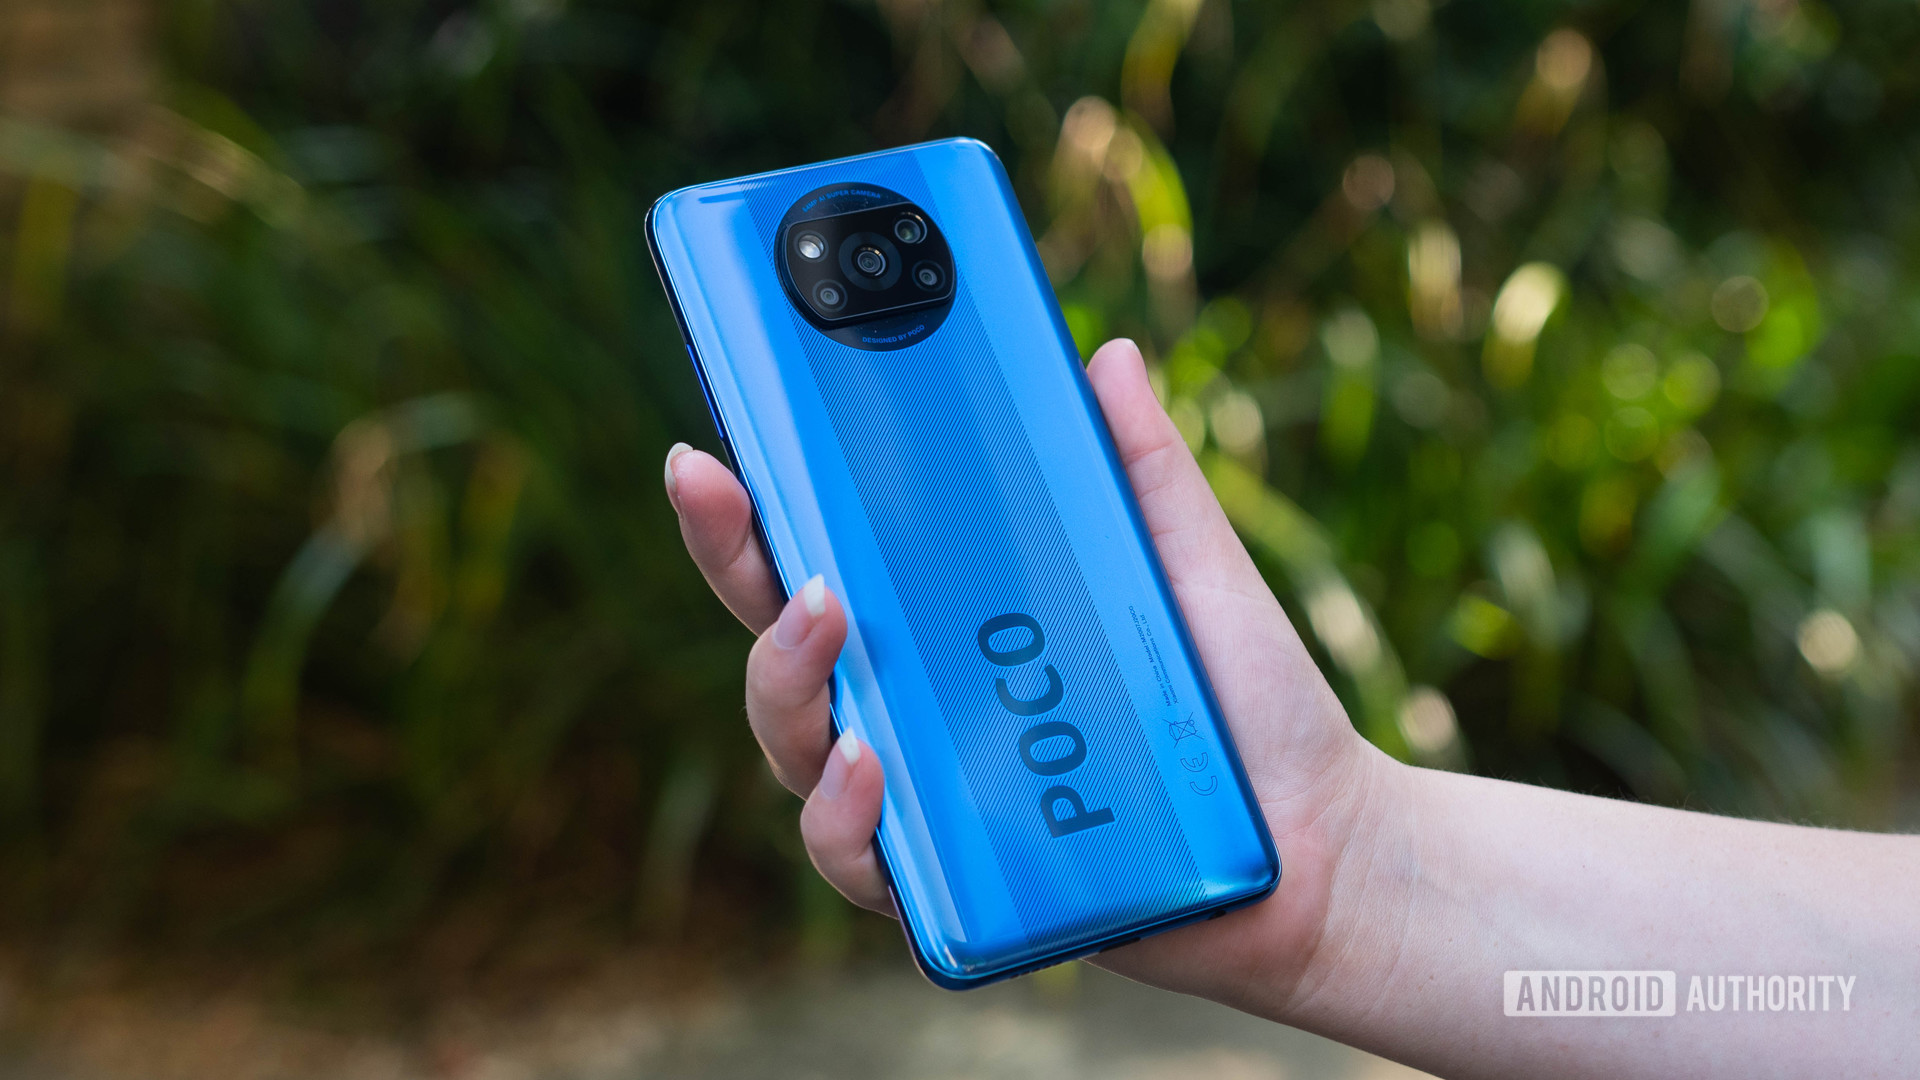 Poco X3 PRO (5160 mAh Battery, 128 GB Storage) Price and features